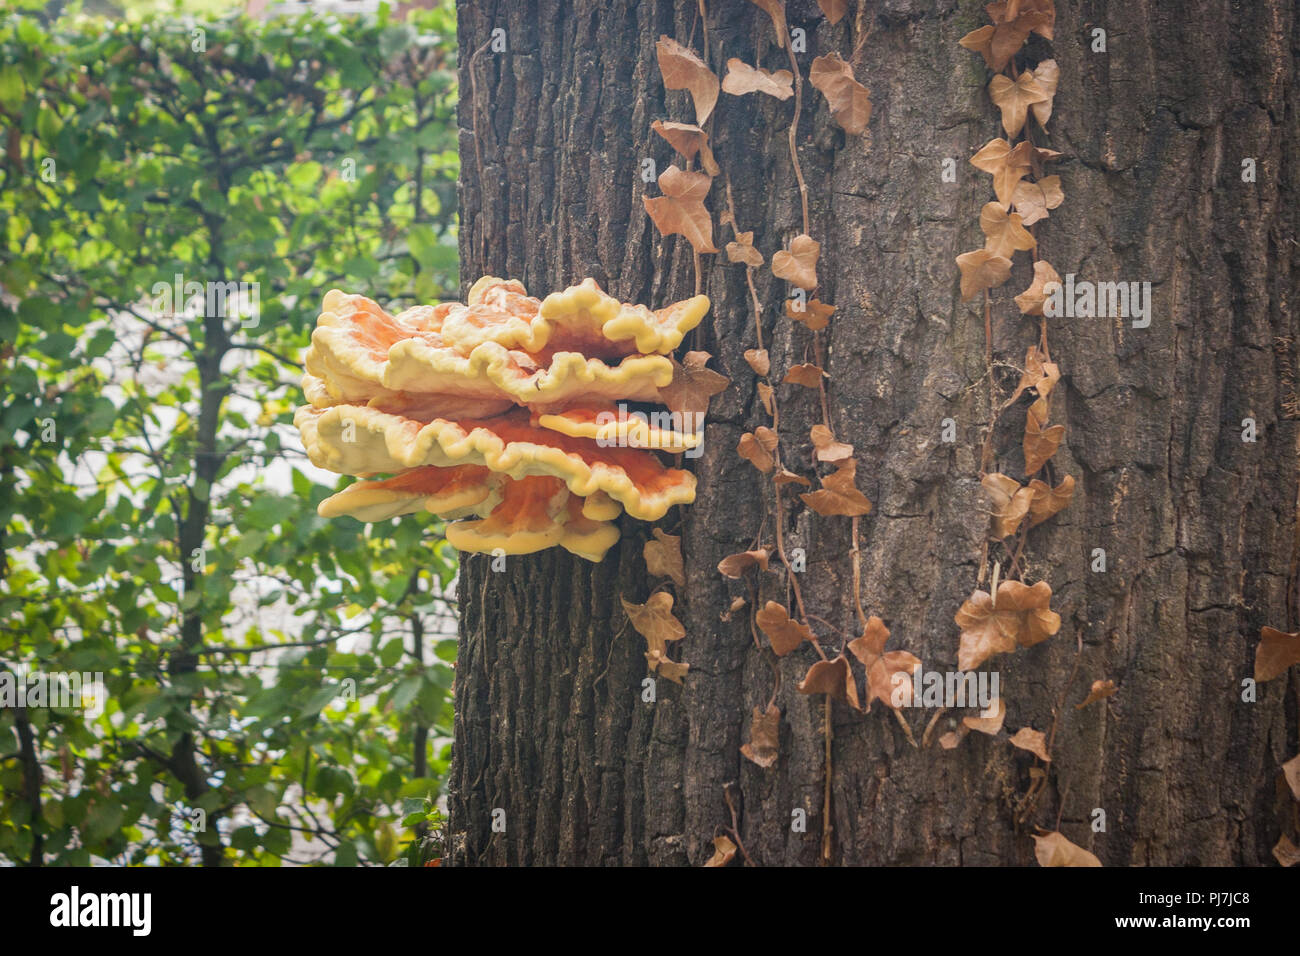 Large yellow and orange Shelf or Bracket fungus grows on the trunk of a tree in early autumn. Stock Photo